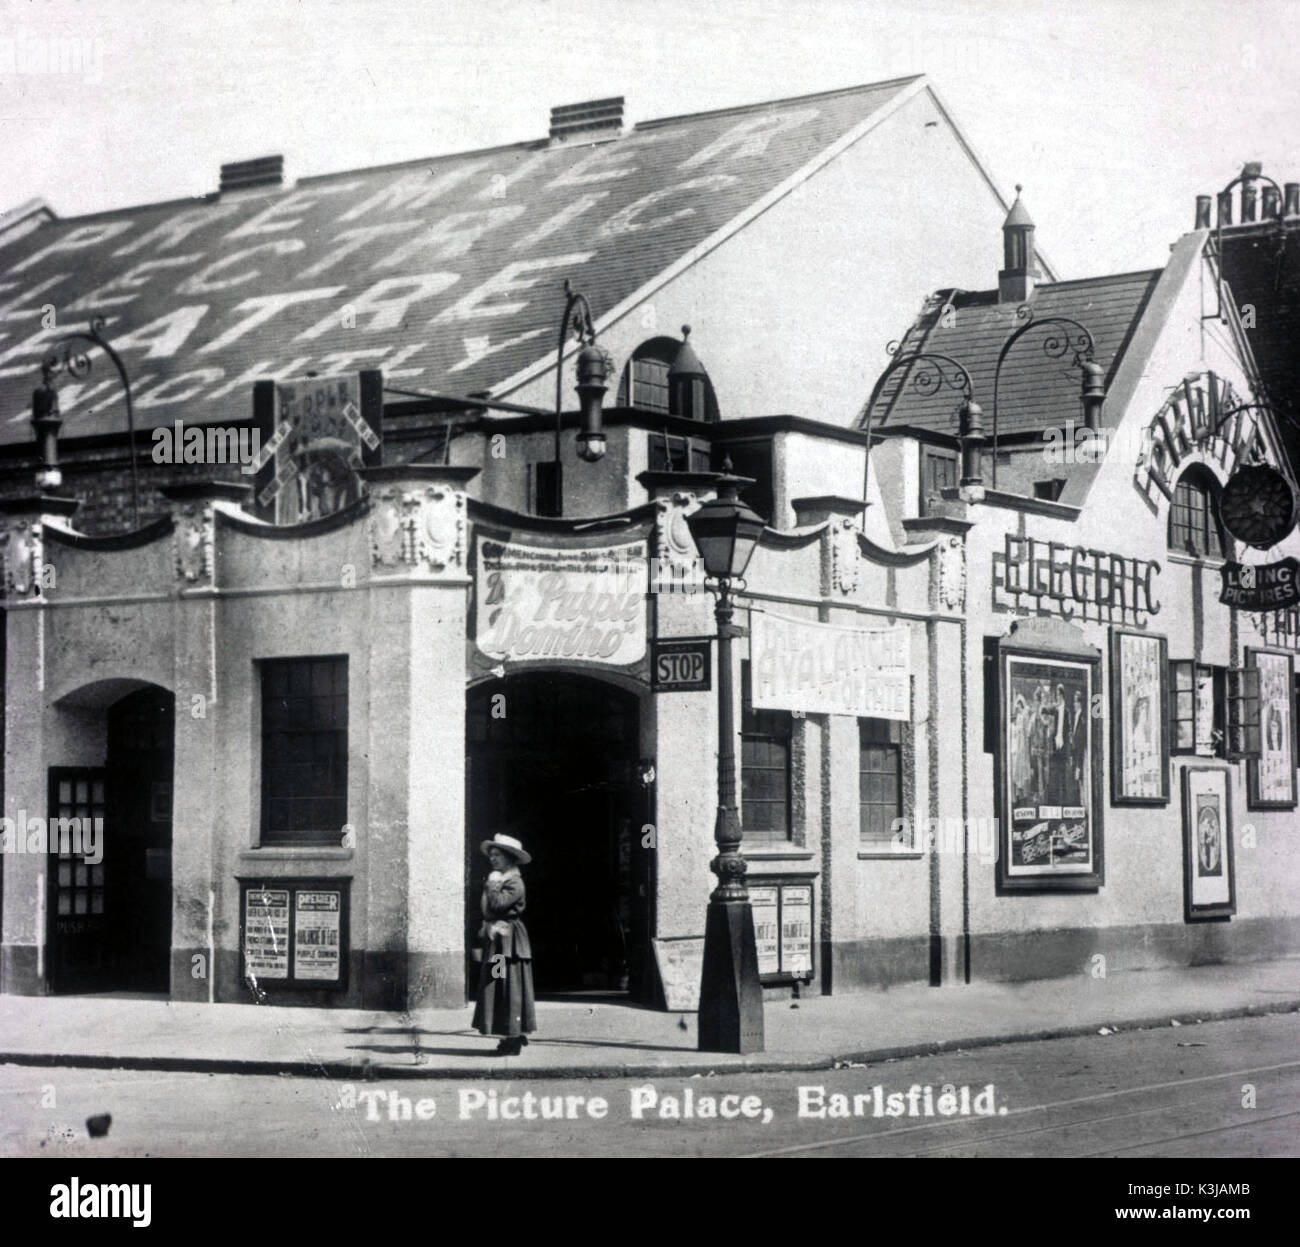 PICTURE PALACE EARLSFIELD Stock Photo